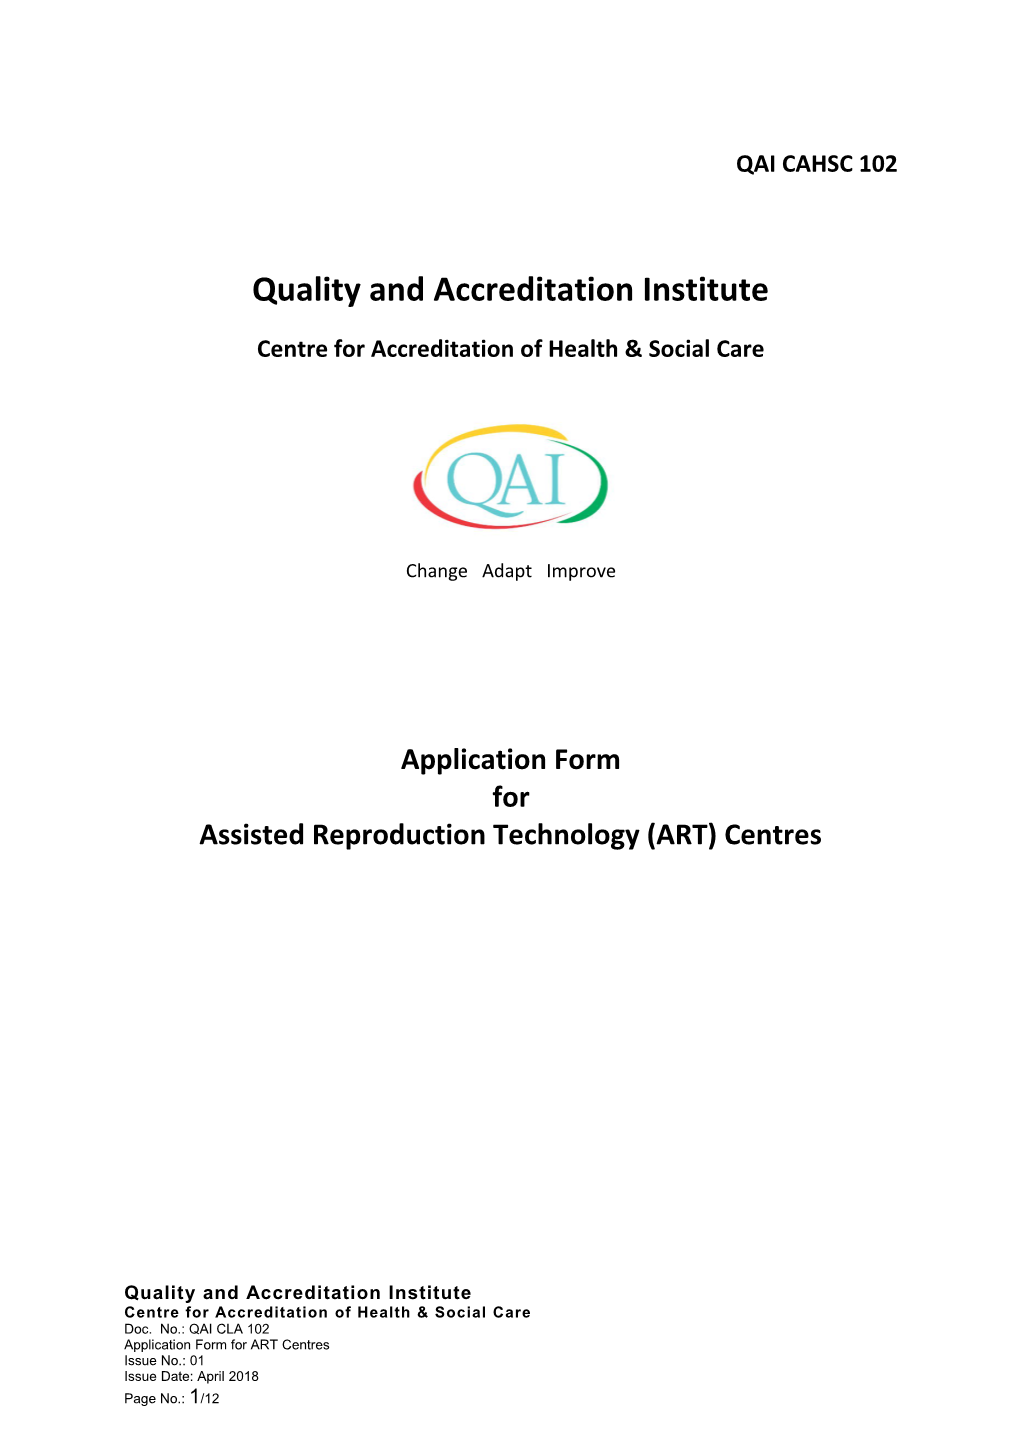 Quality and Accreditation Institute